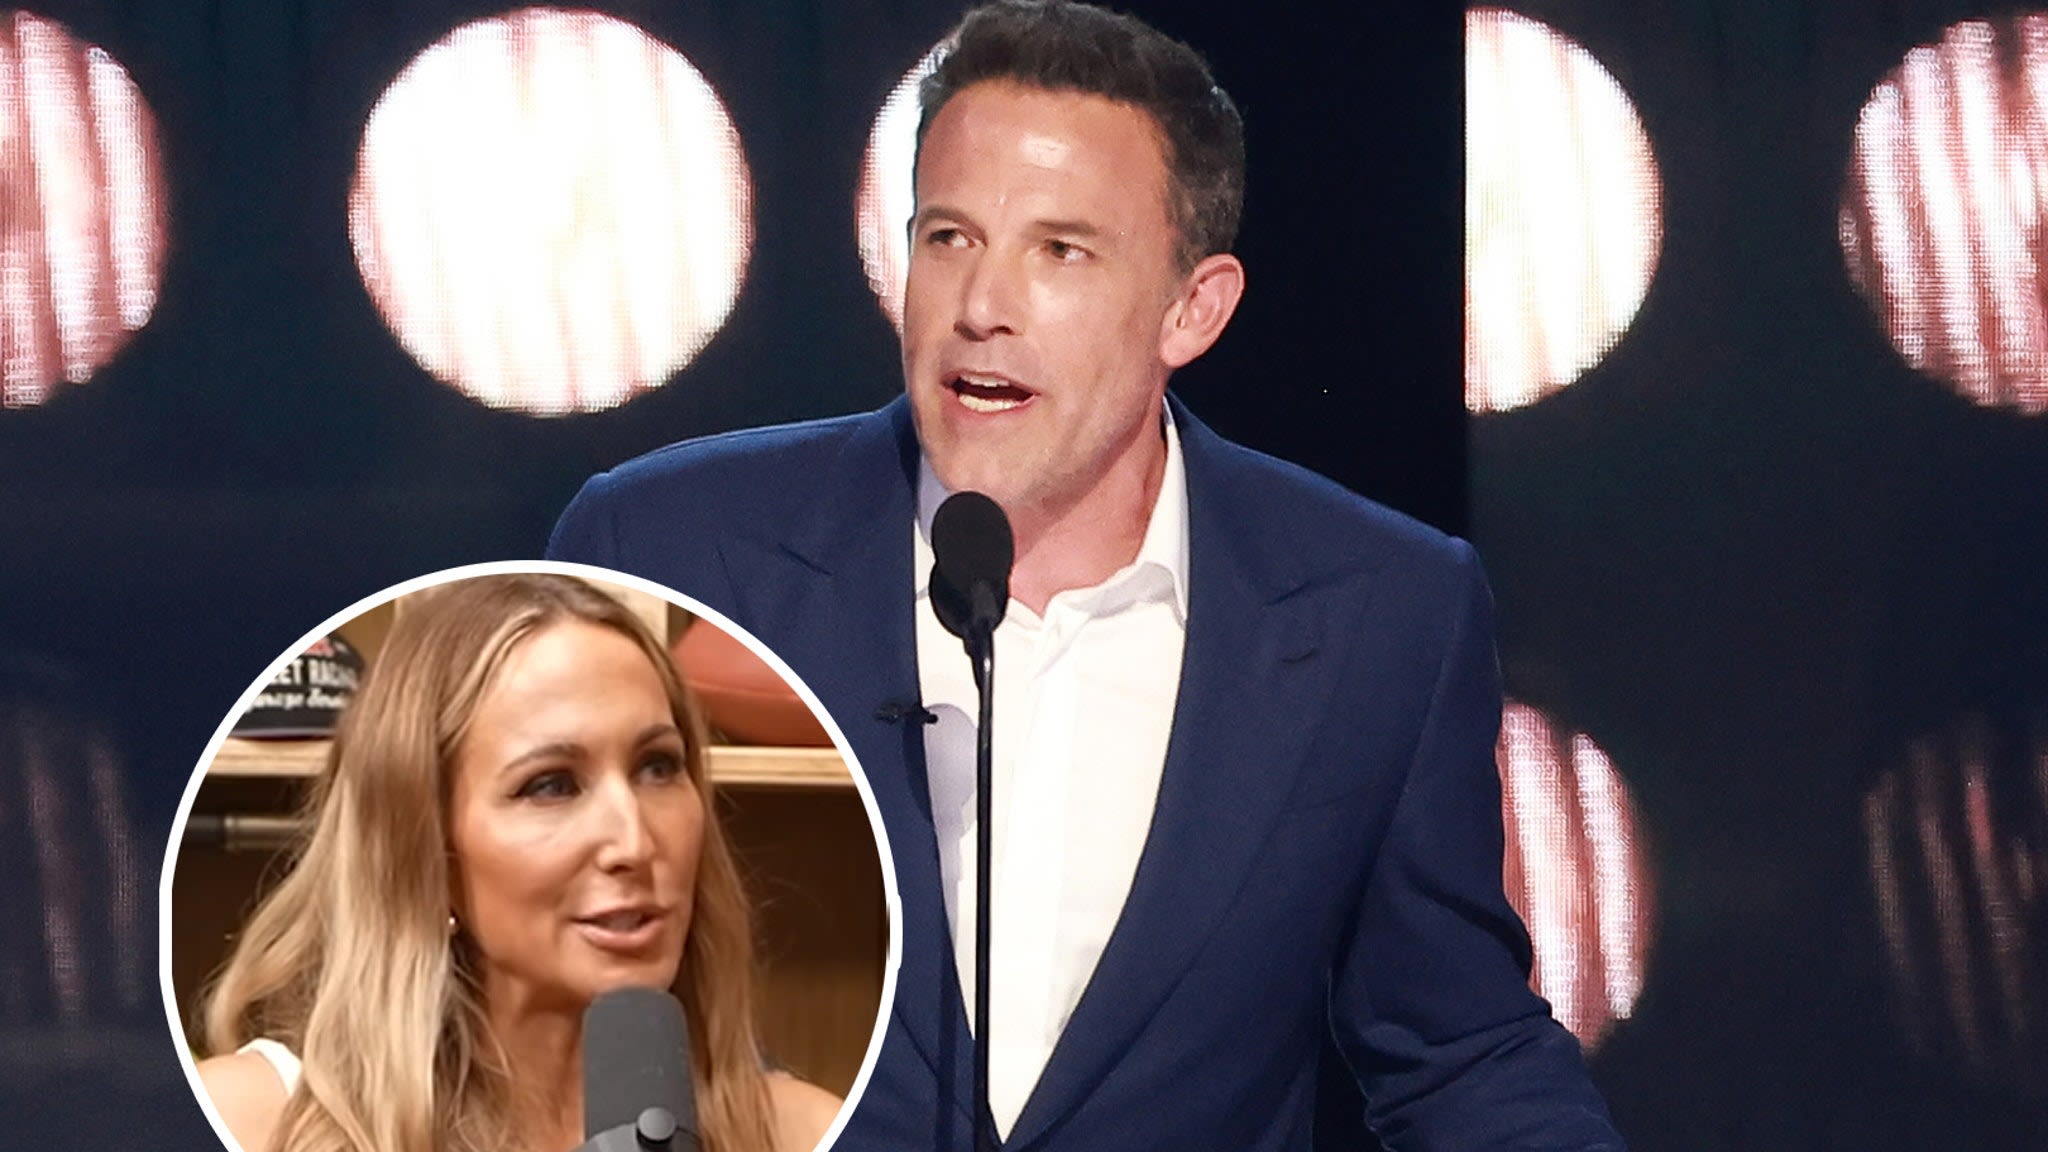 Ben Affleck 'Bombed' at Tom Brady Roast Says Nikki Glaser: He 'Didn't Prepare,' Phoned It In